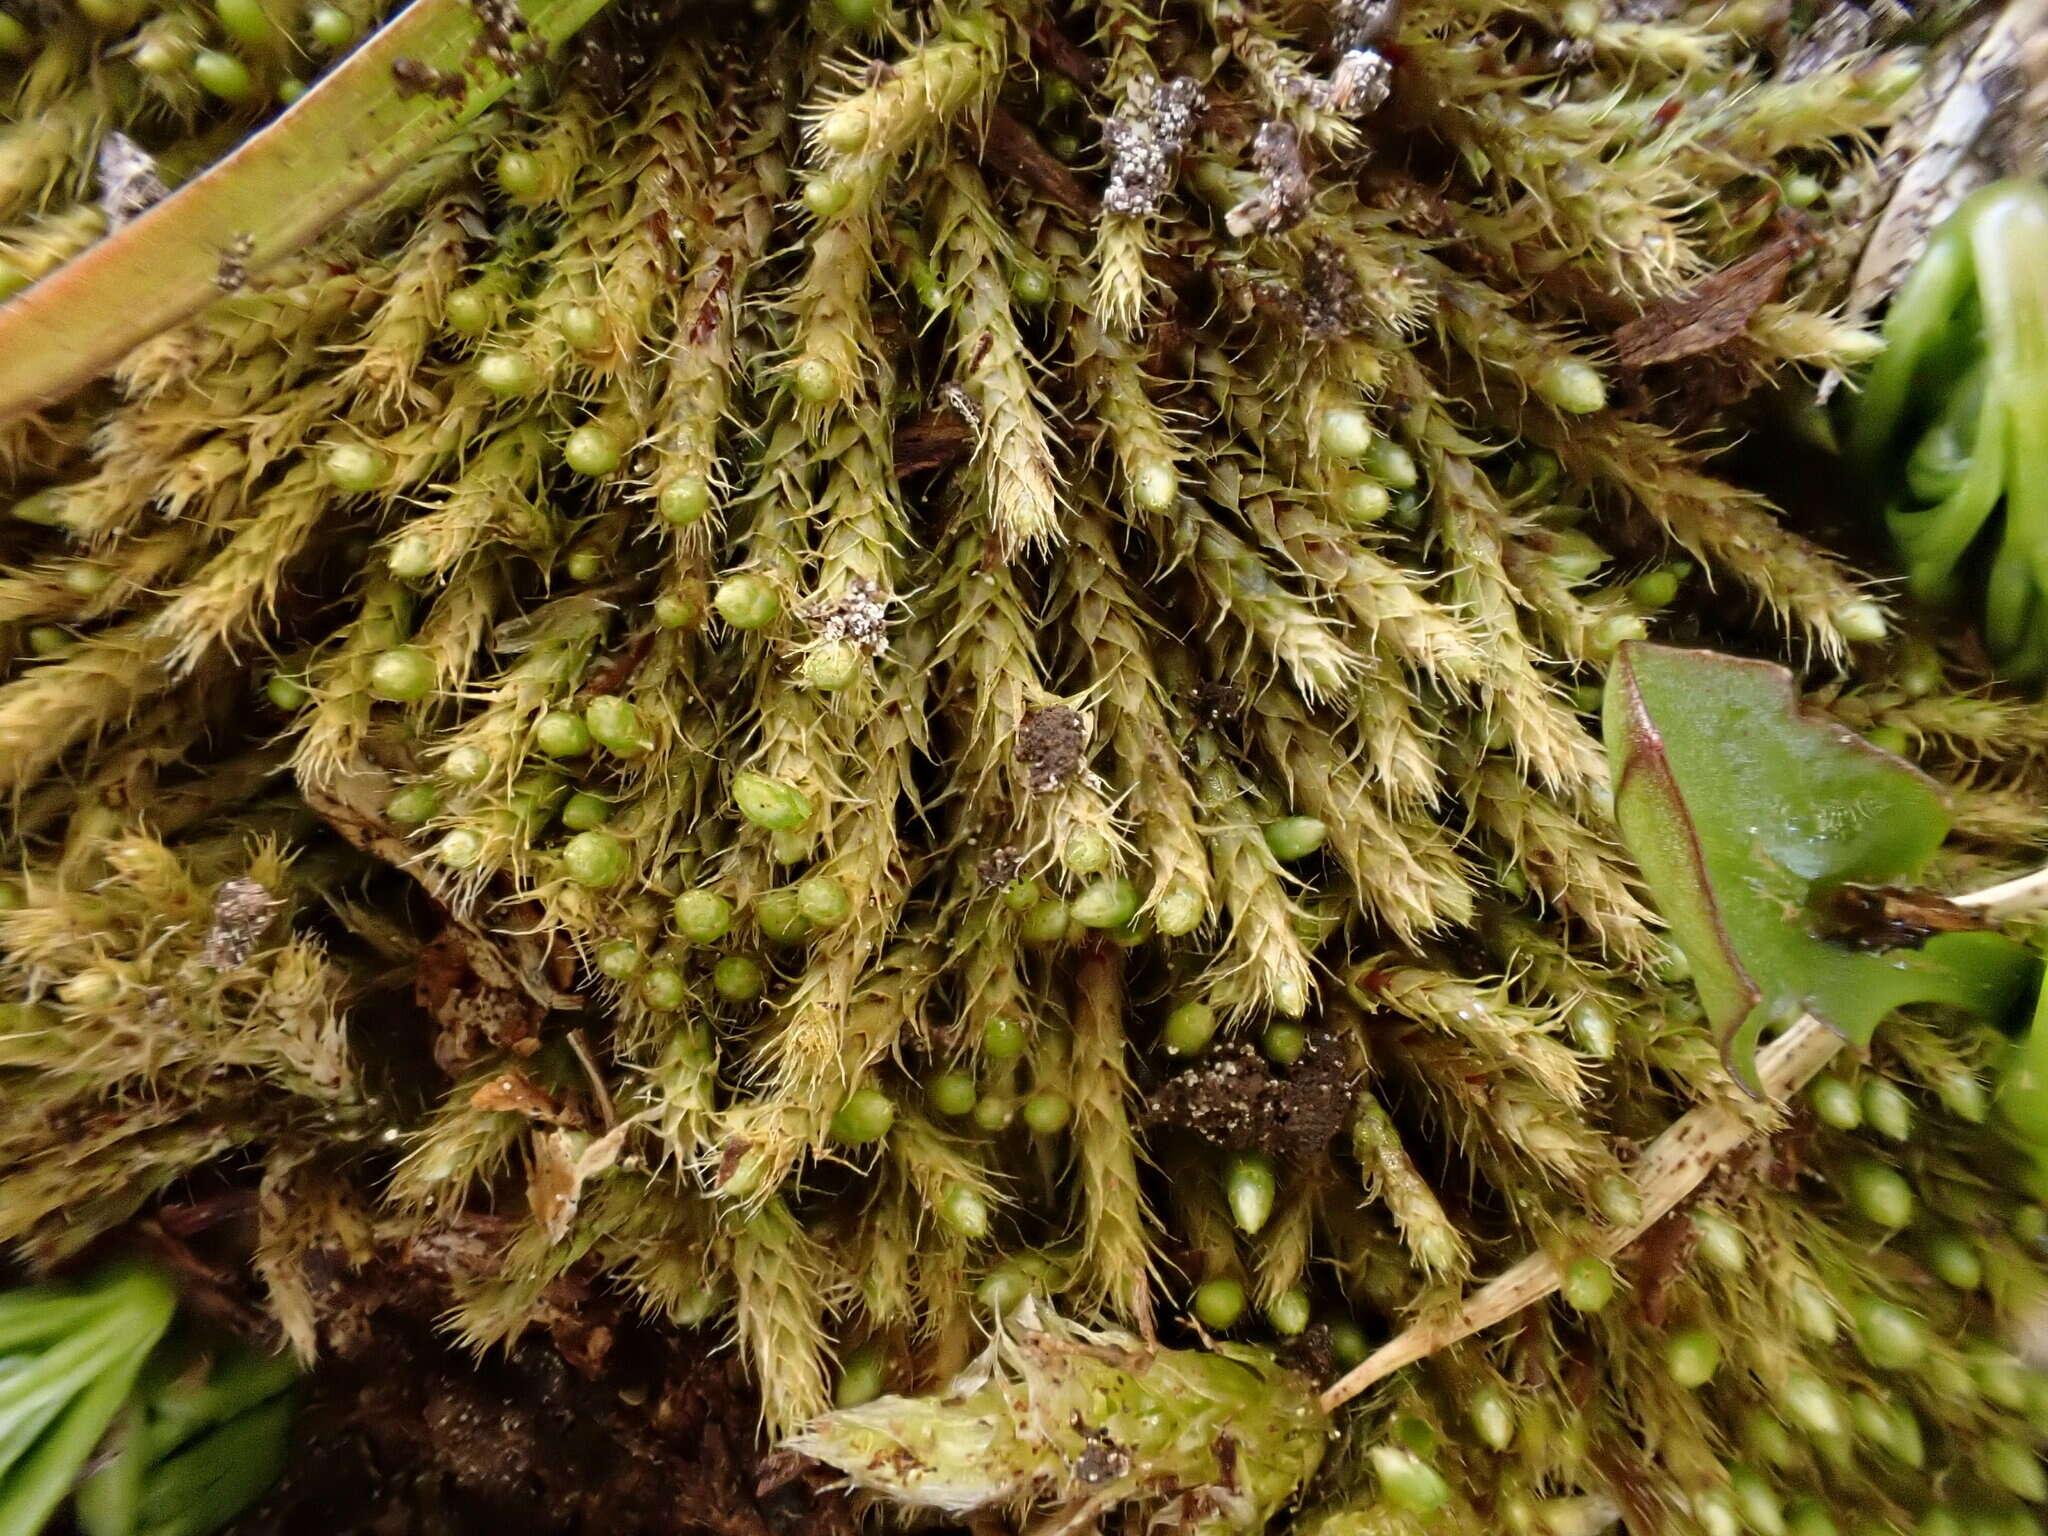 Image of woolly apple-moss